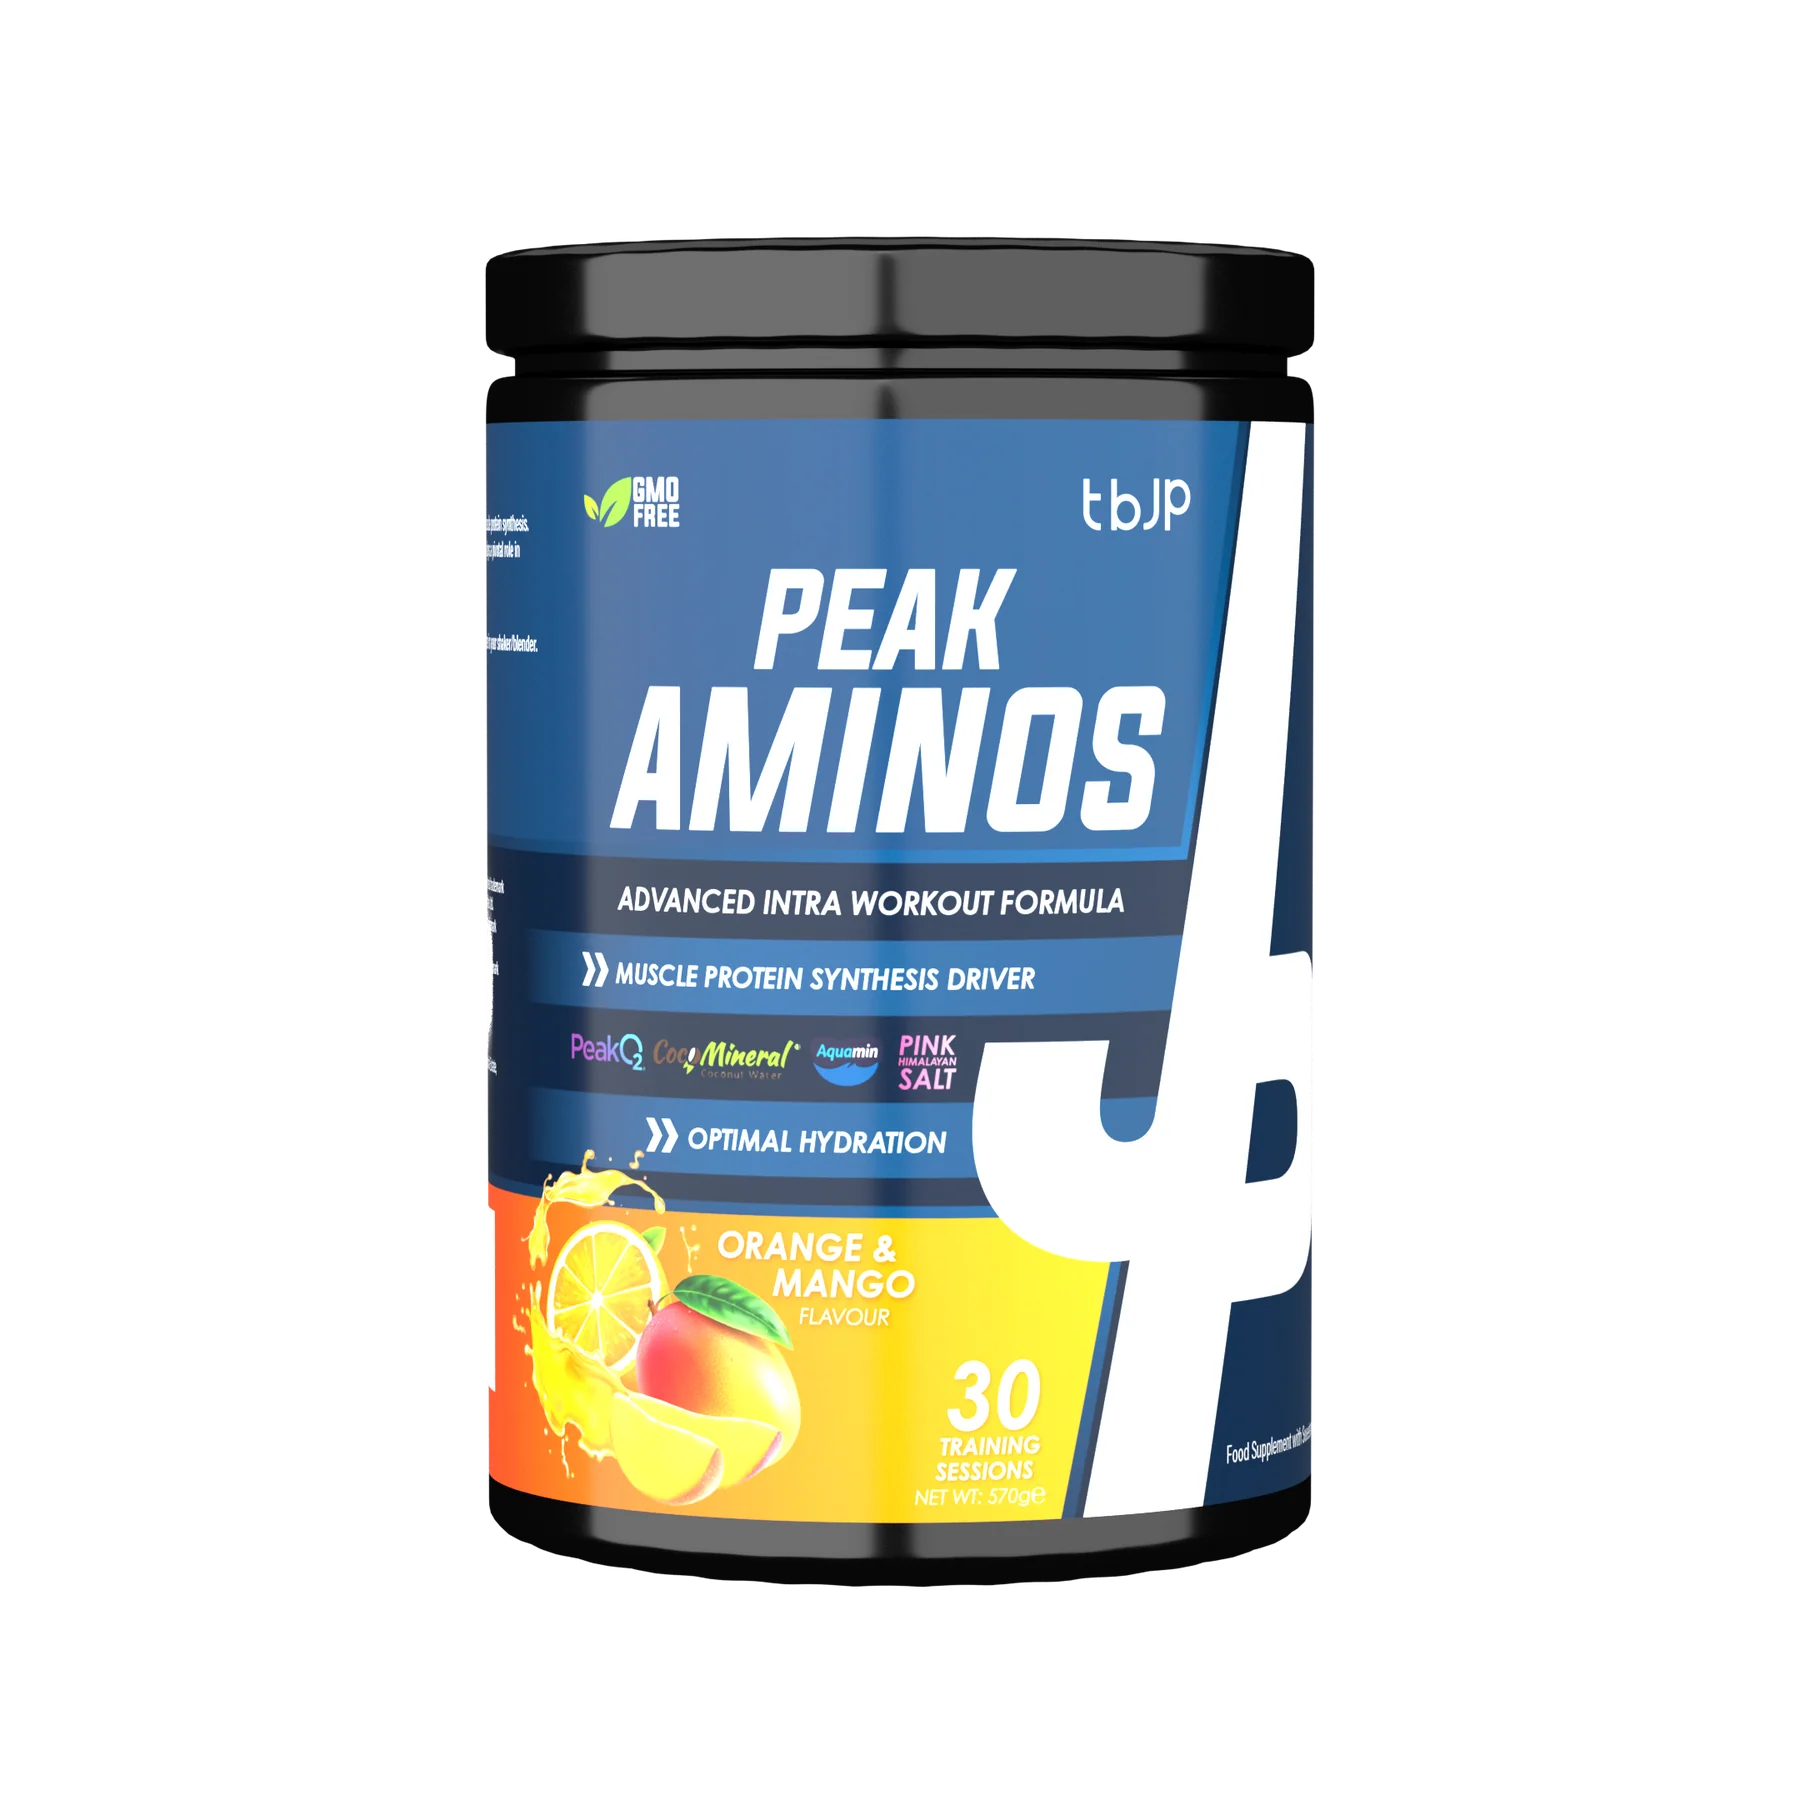 Trained by JP Nutrition - Peak Aminos